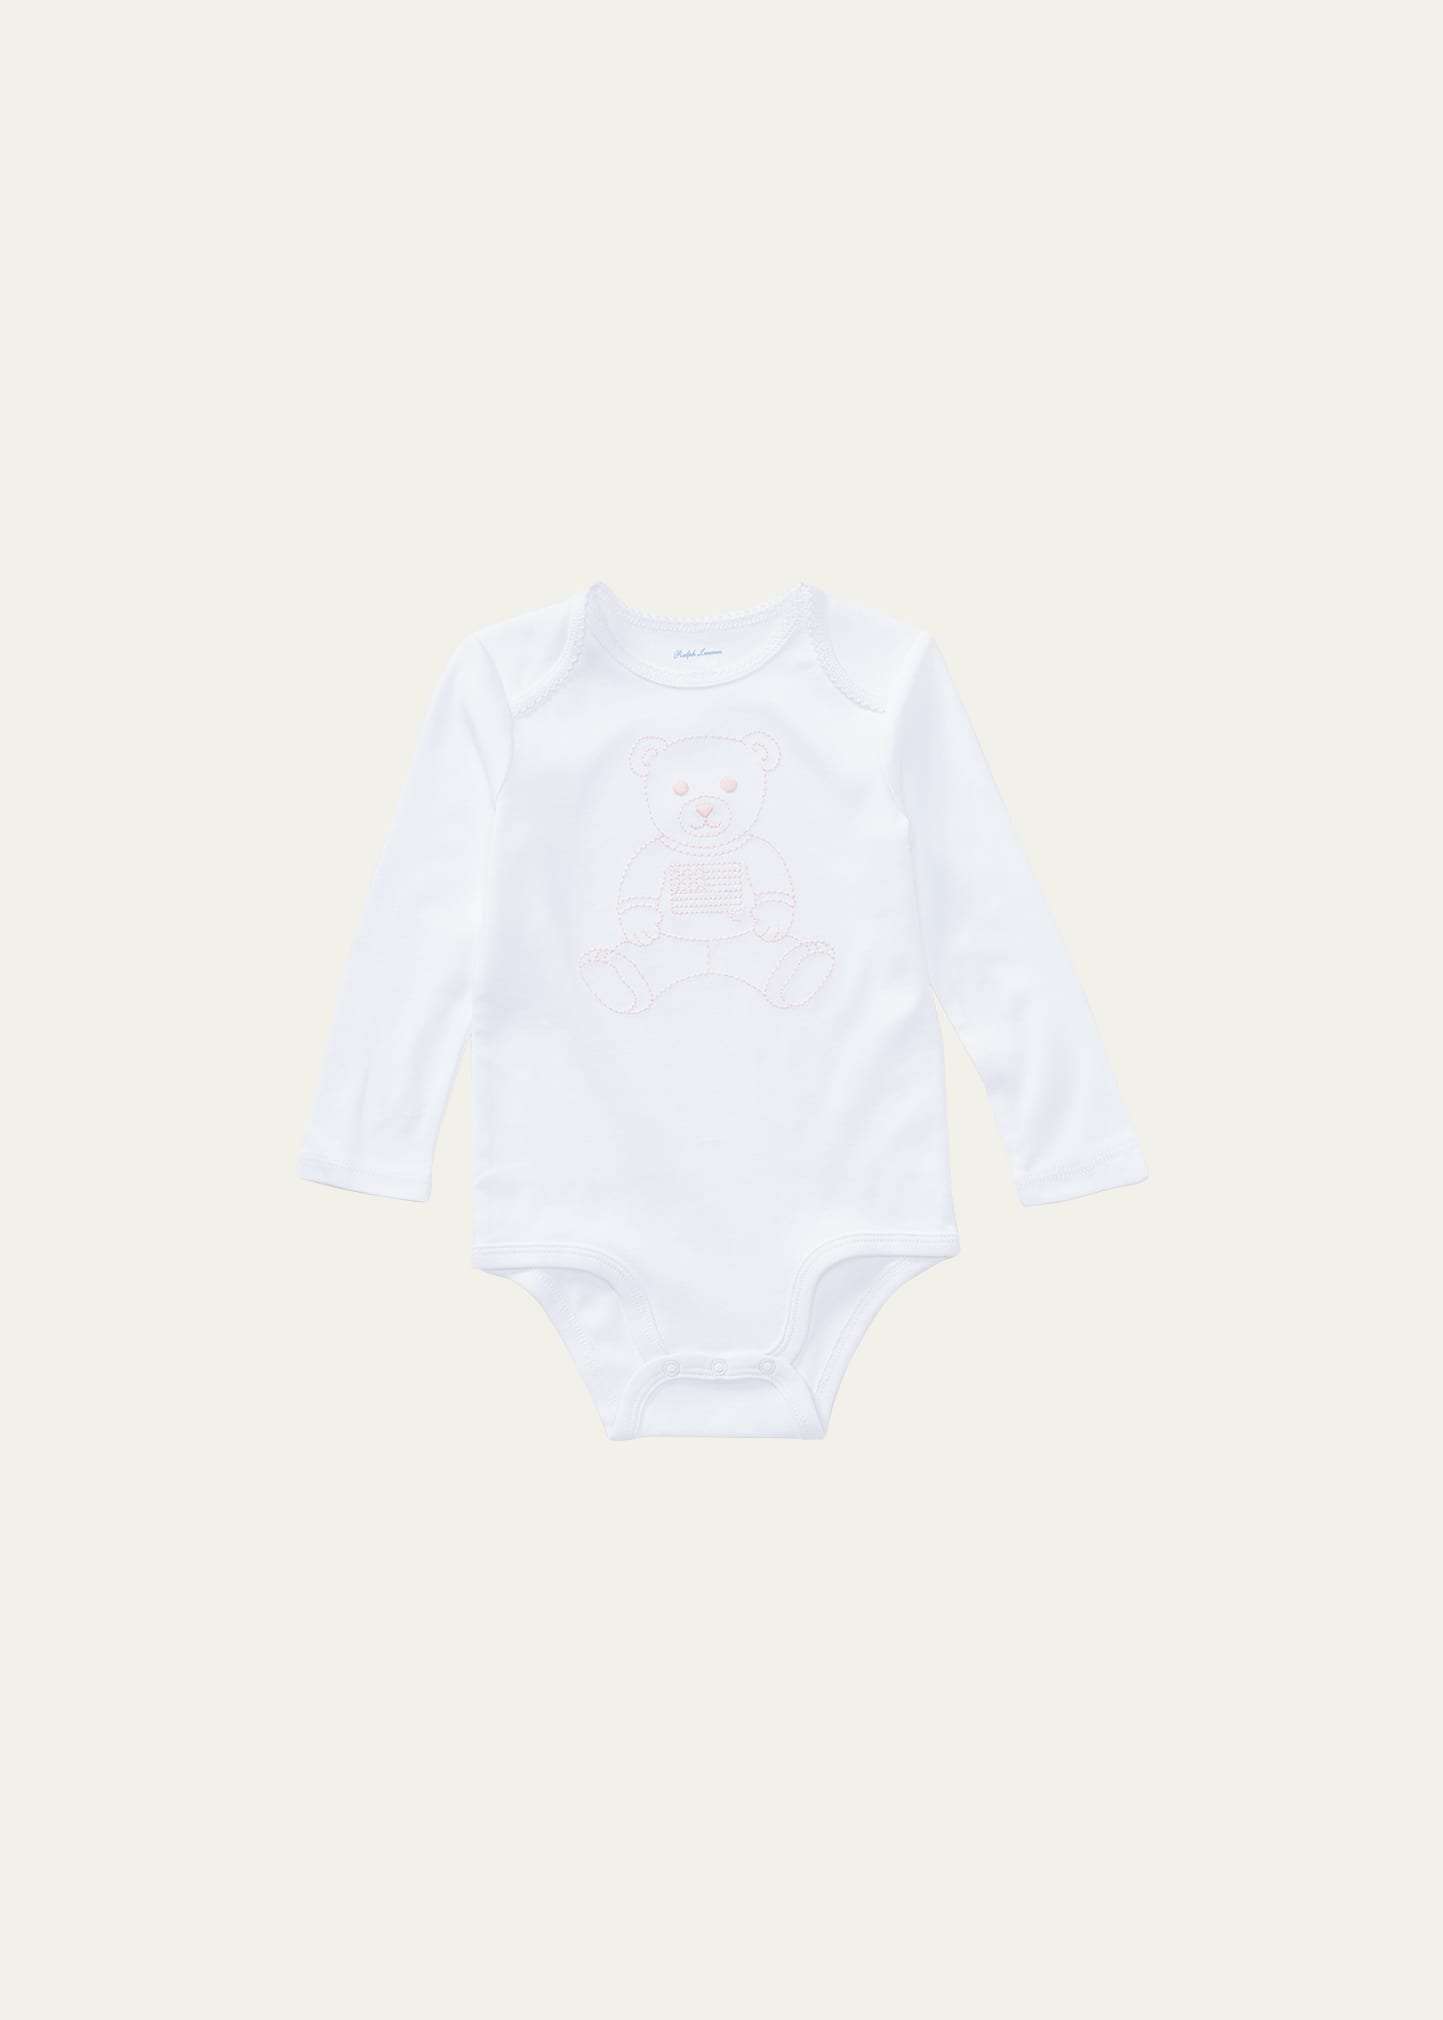 Polo Bear Embroidered Long-Sleeve Bodysuit, Size 3M-12M